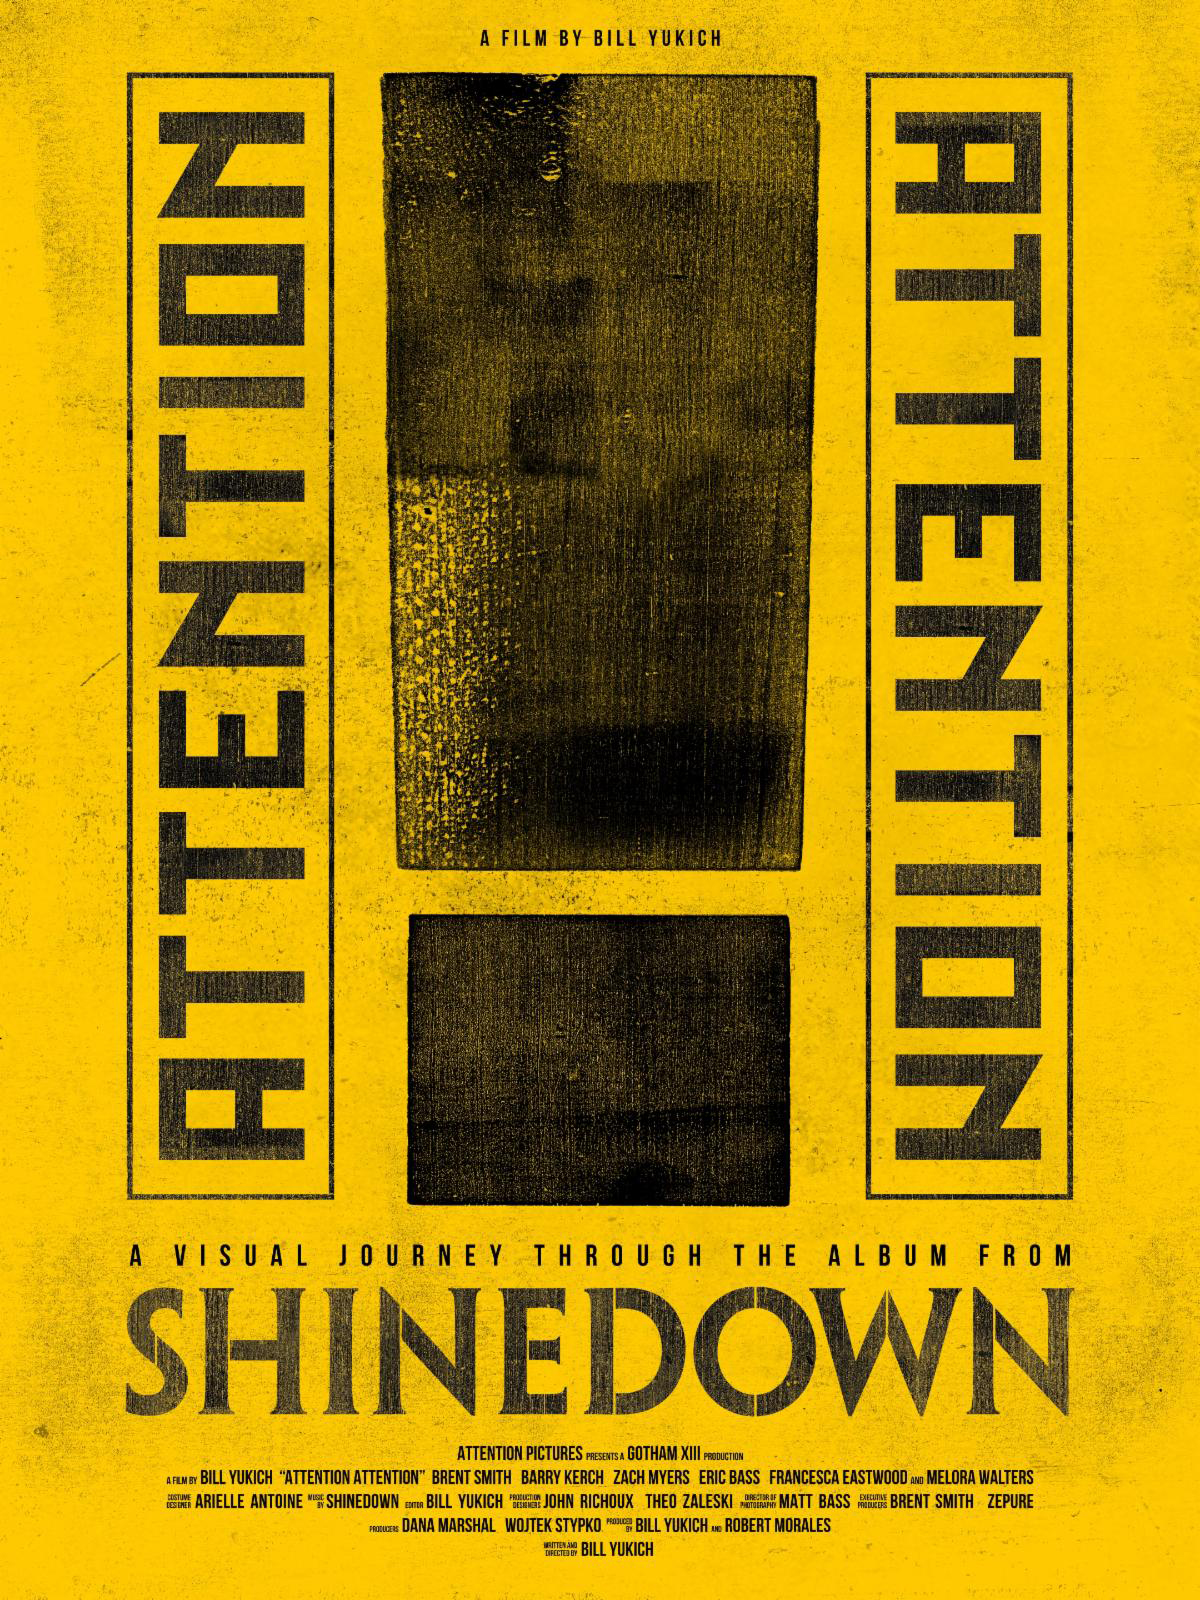 Shinedown - 'Attention Attention' Film